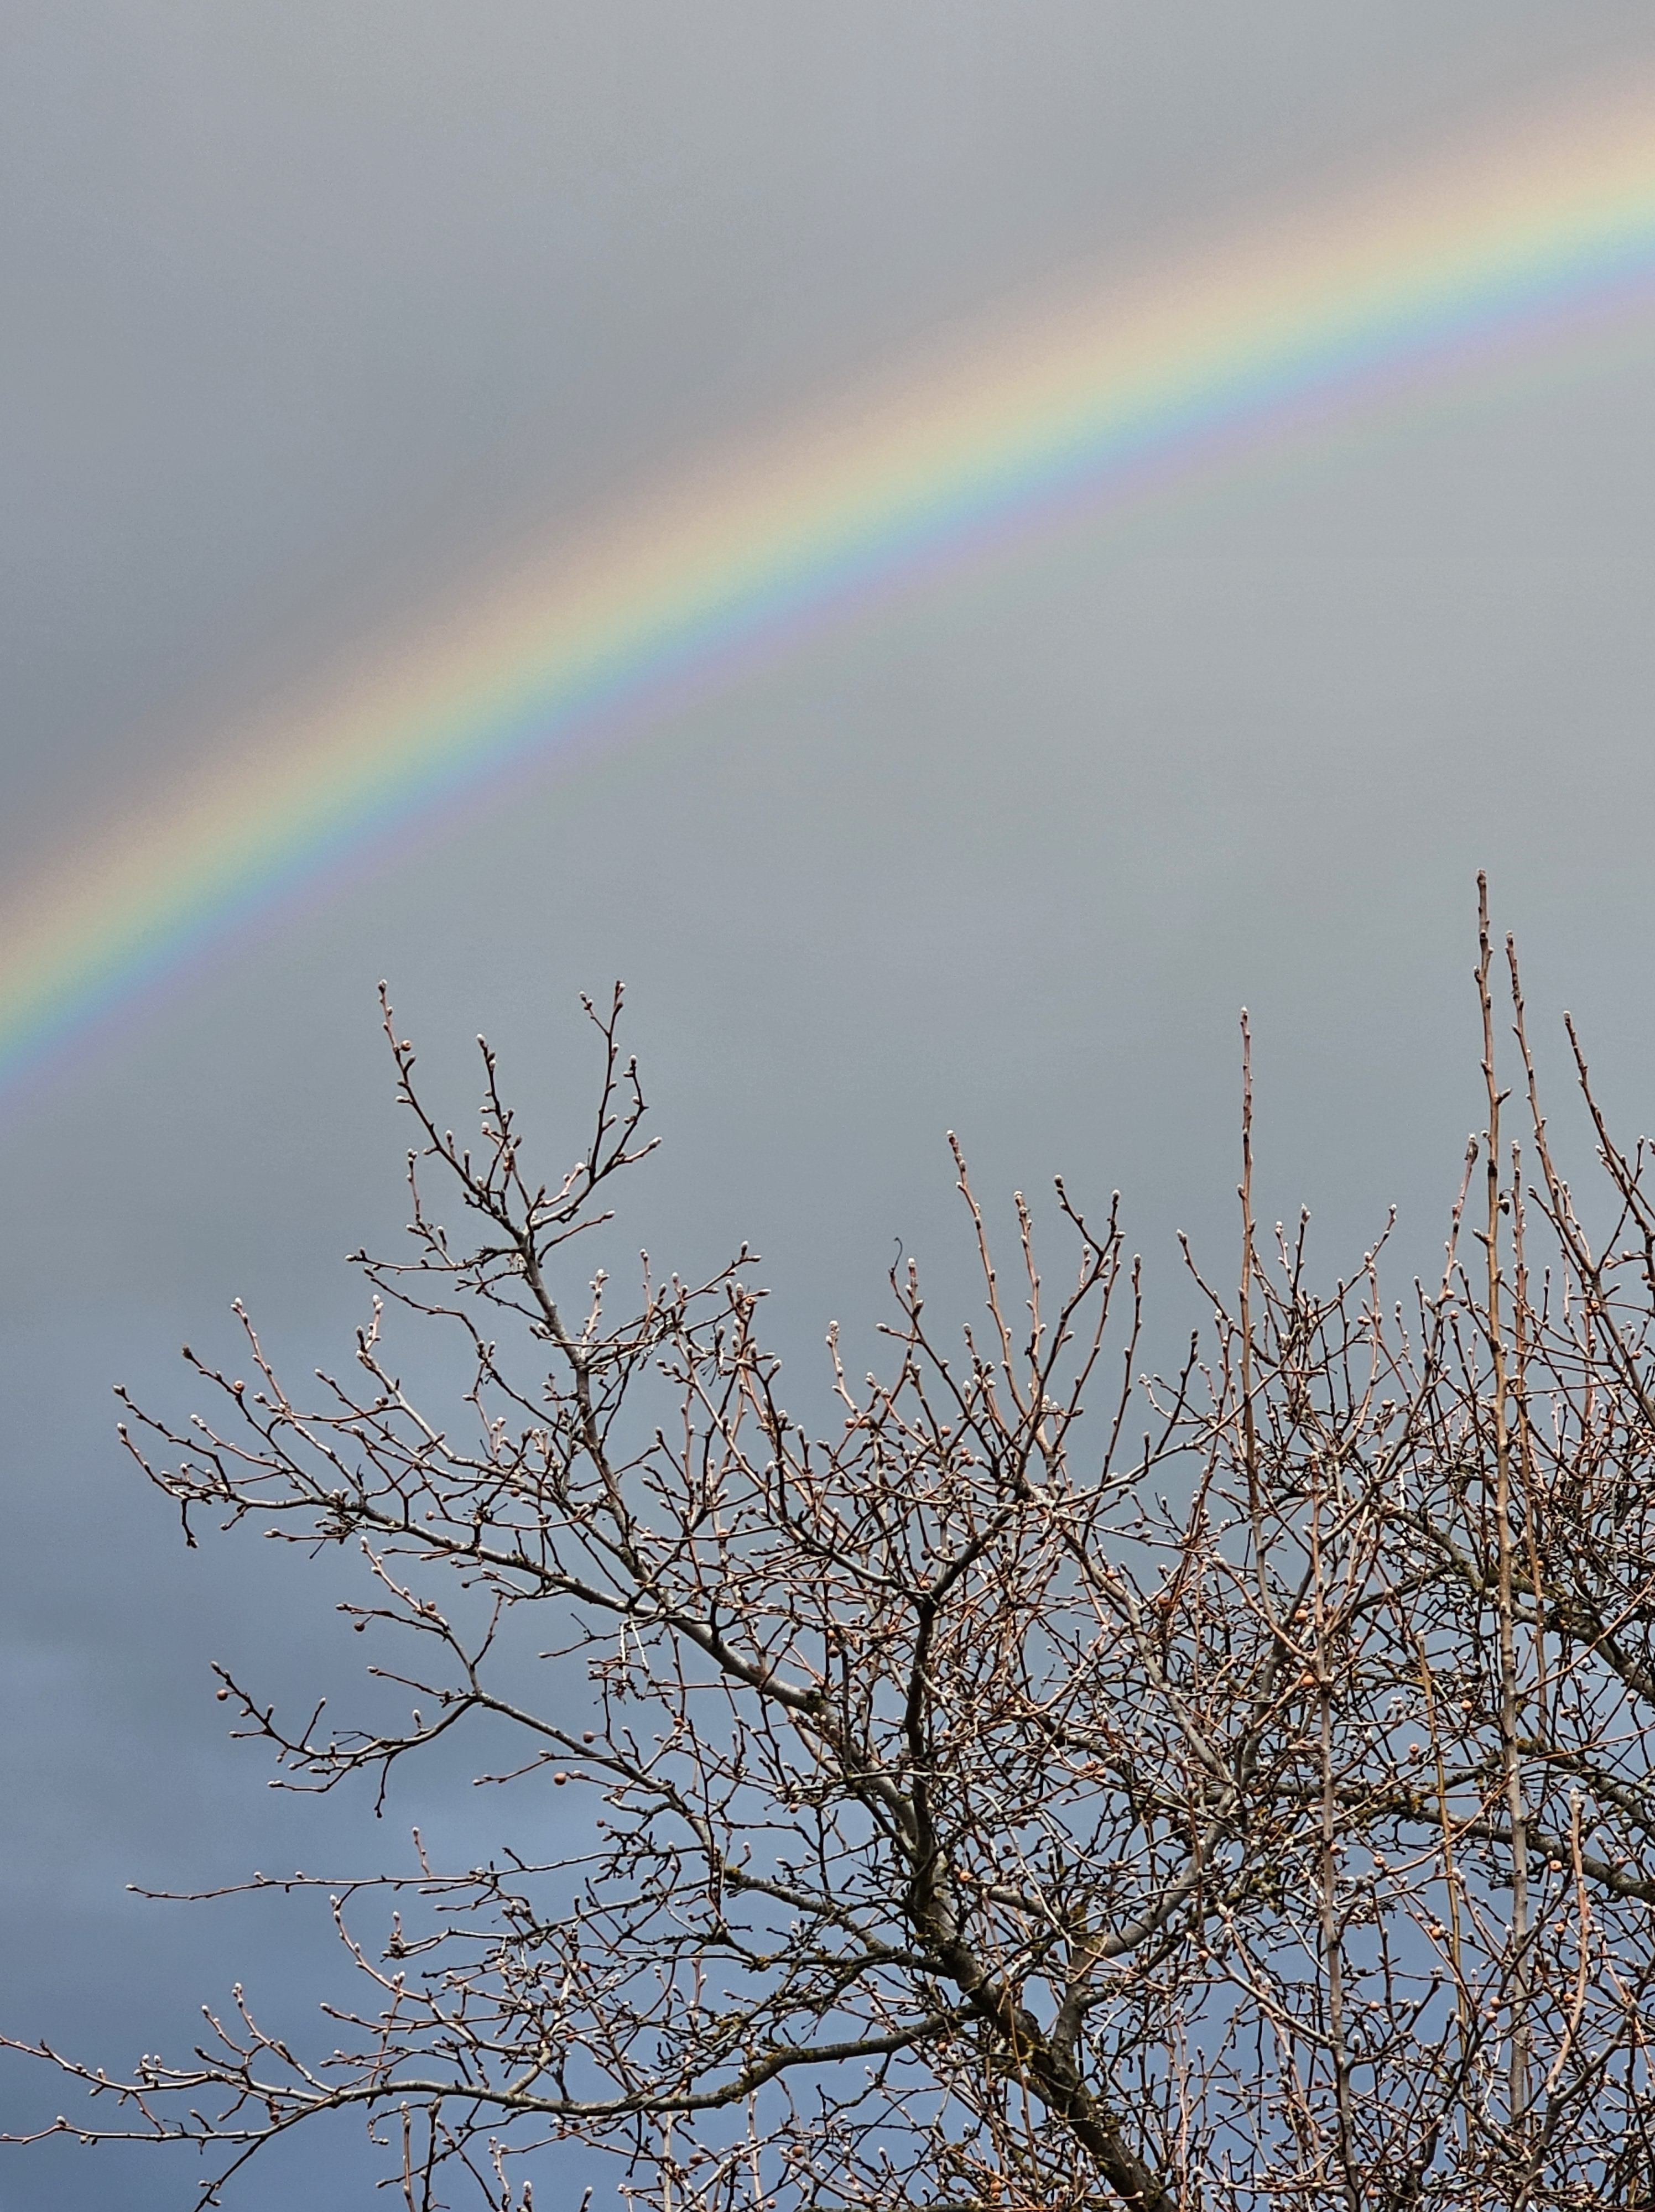 A lovely rainbow against a rain darkened backdrop and arching over a budding tree.